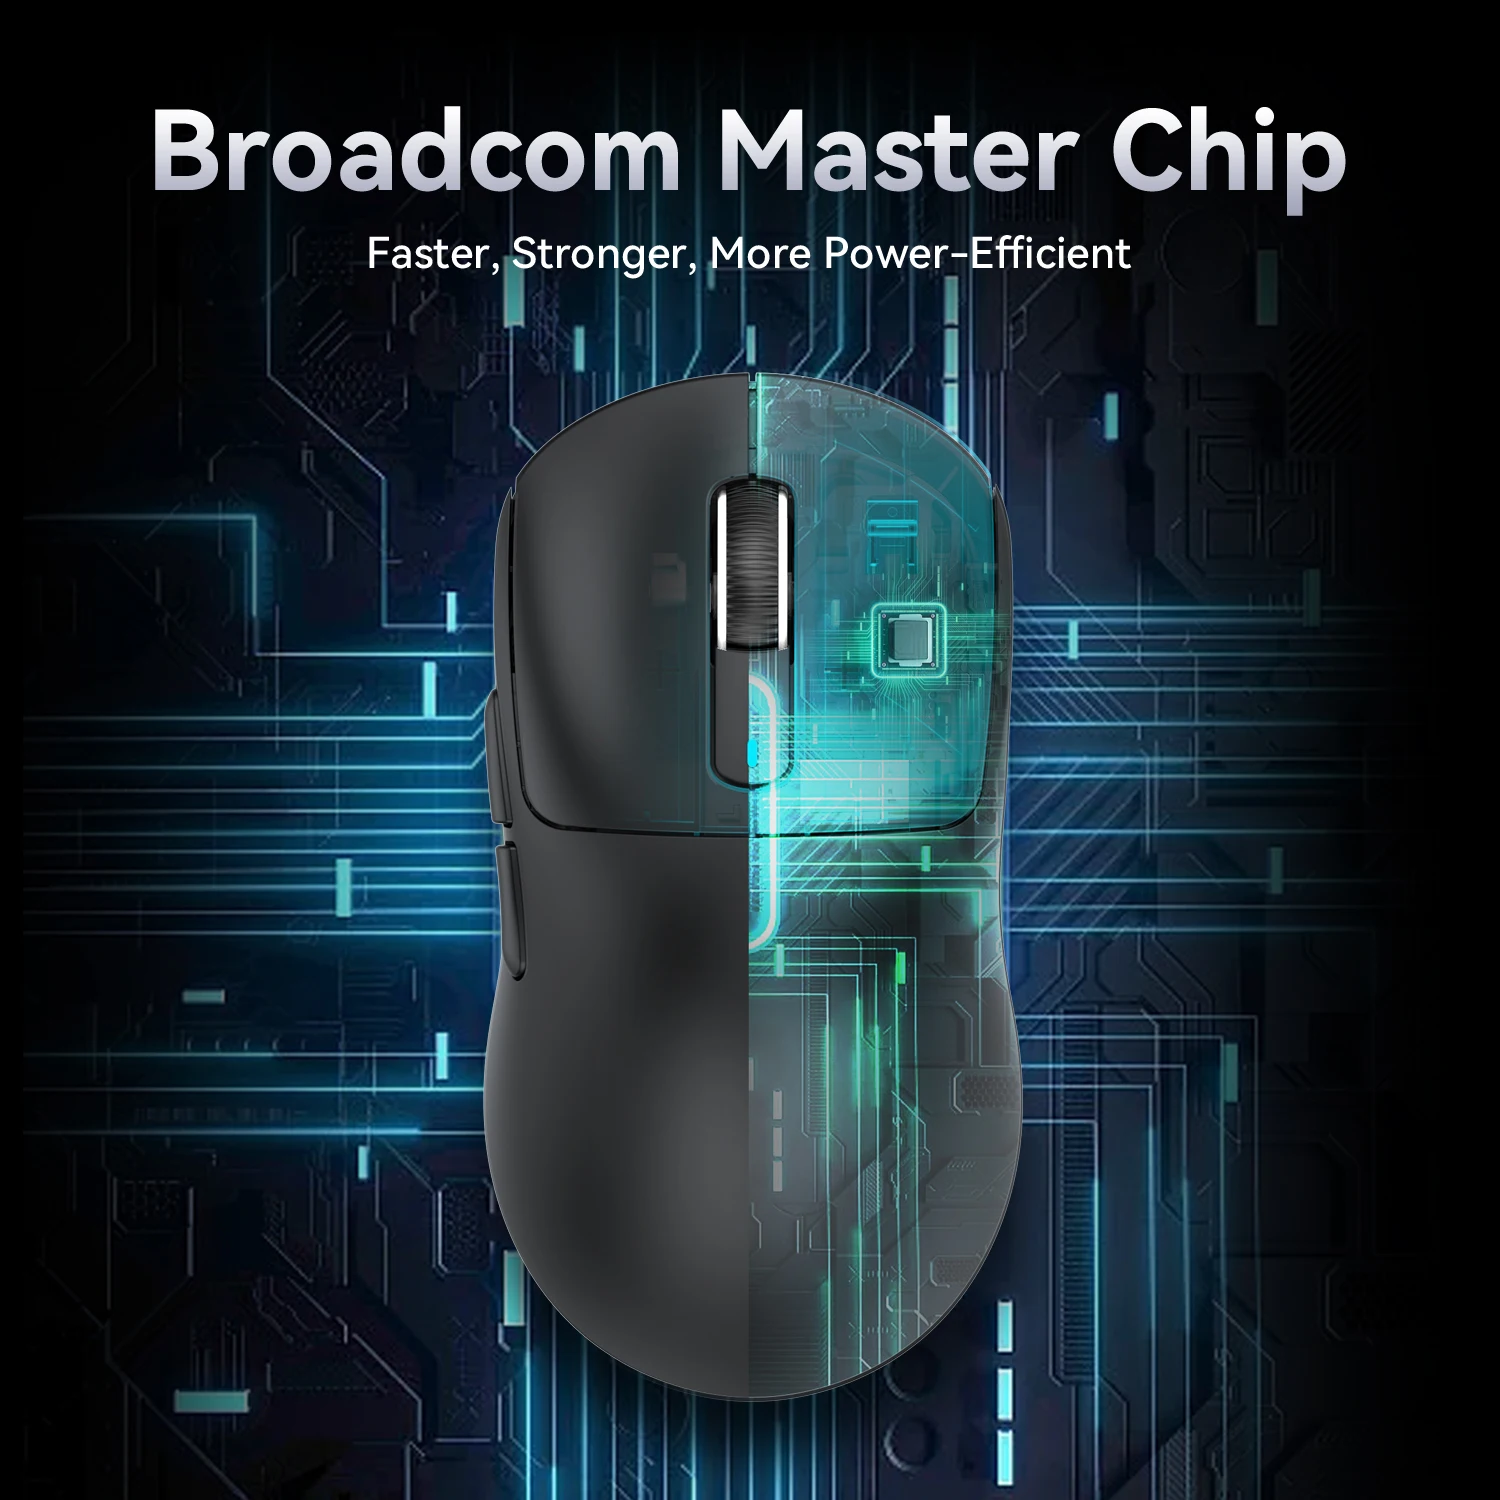 Attack Shark X3Pro 4K/8KHz Mouse 59g PixArt PAW3395 26000dpi Tri-Mode Connection Macro Gaming Mouse , for Win/Xbox/PS/Mac